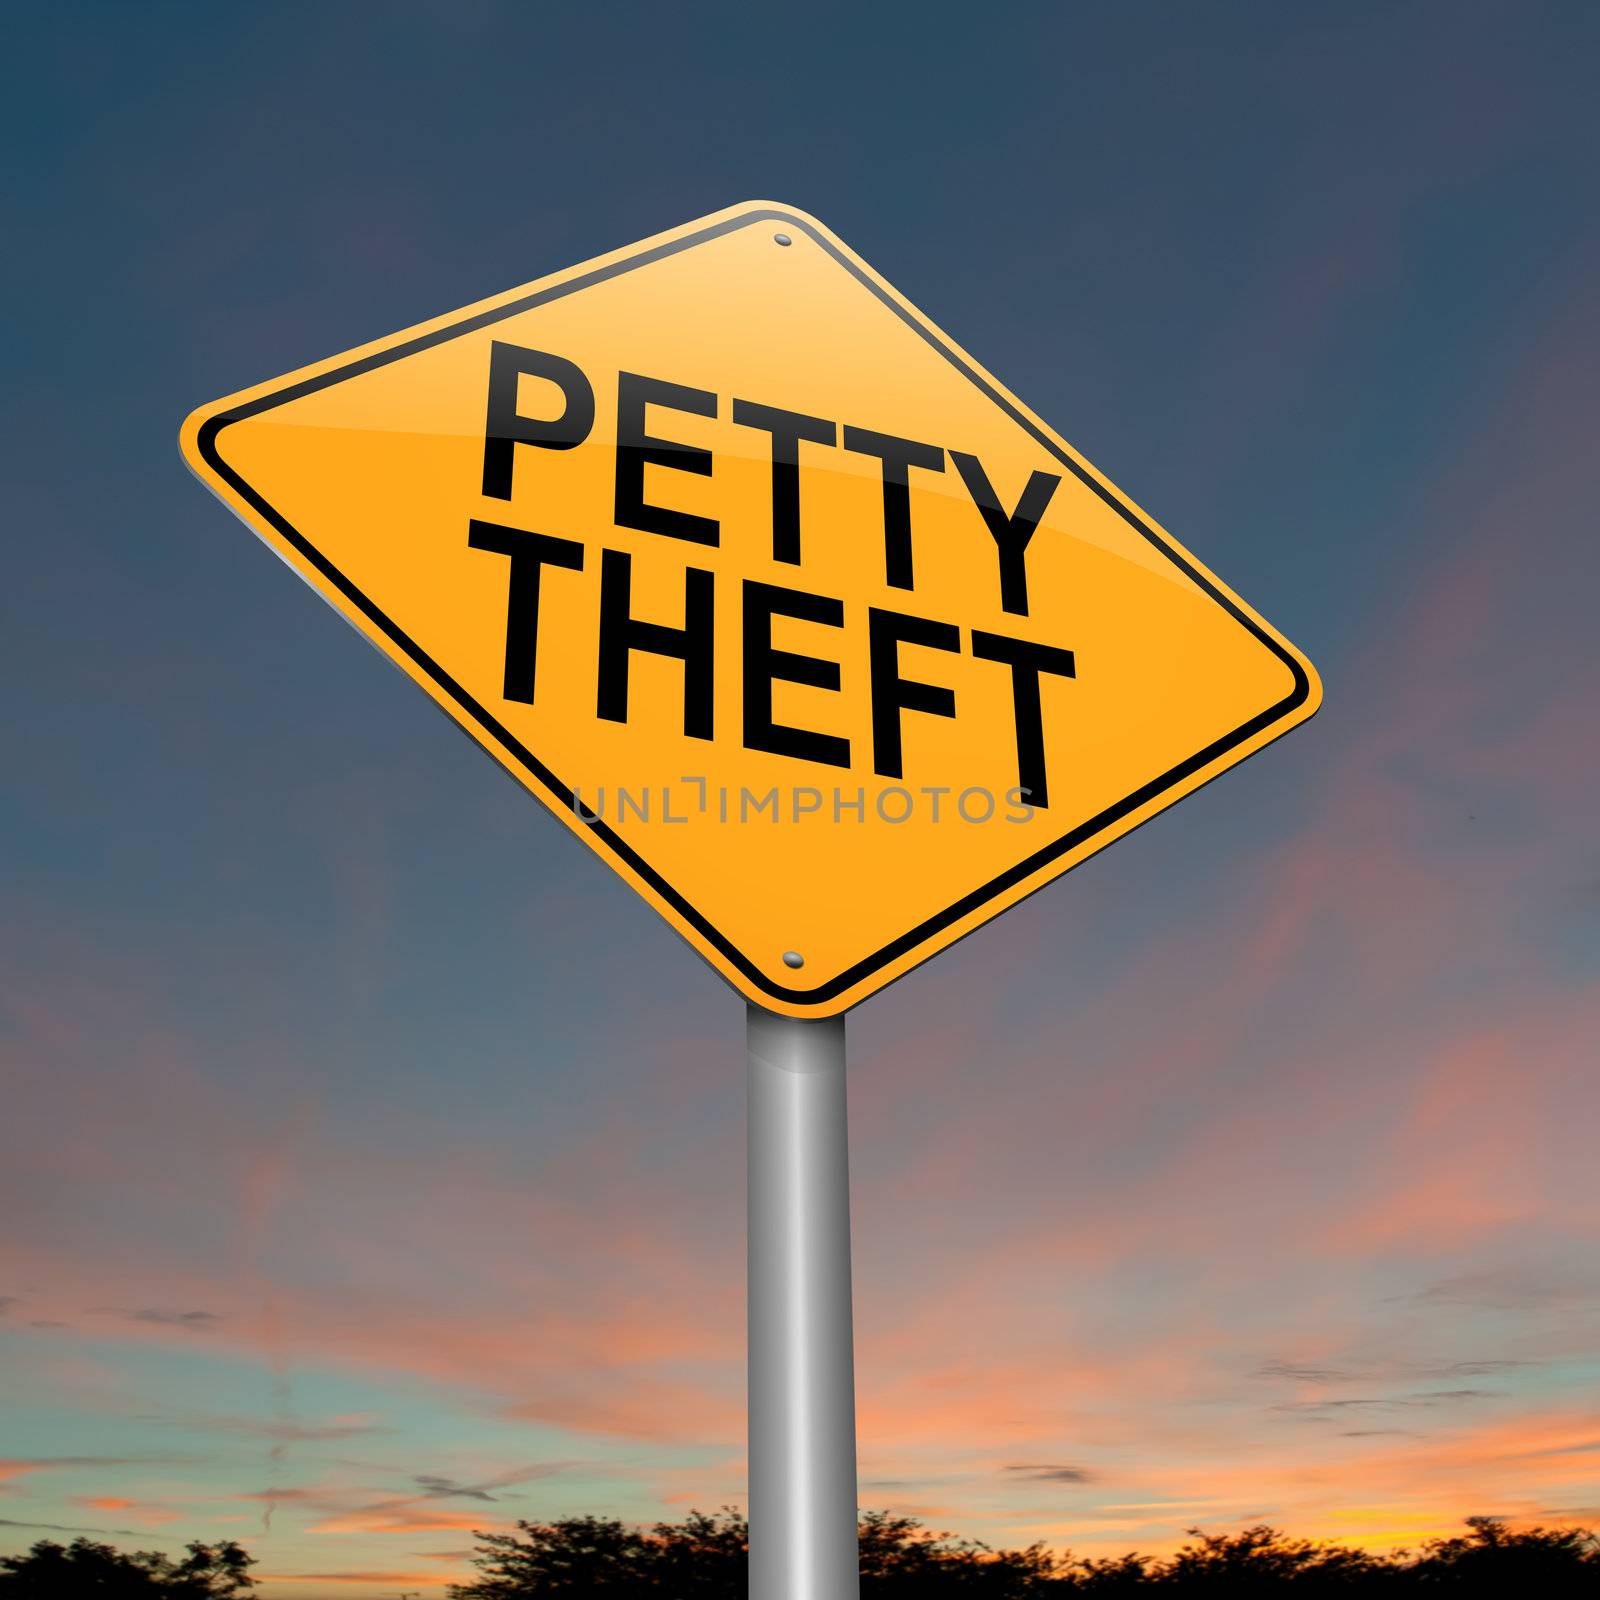 Petty theft sign. by 72soul